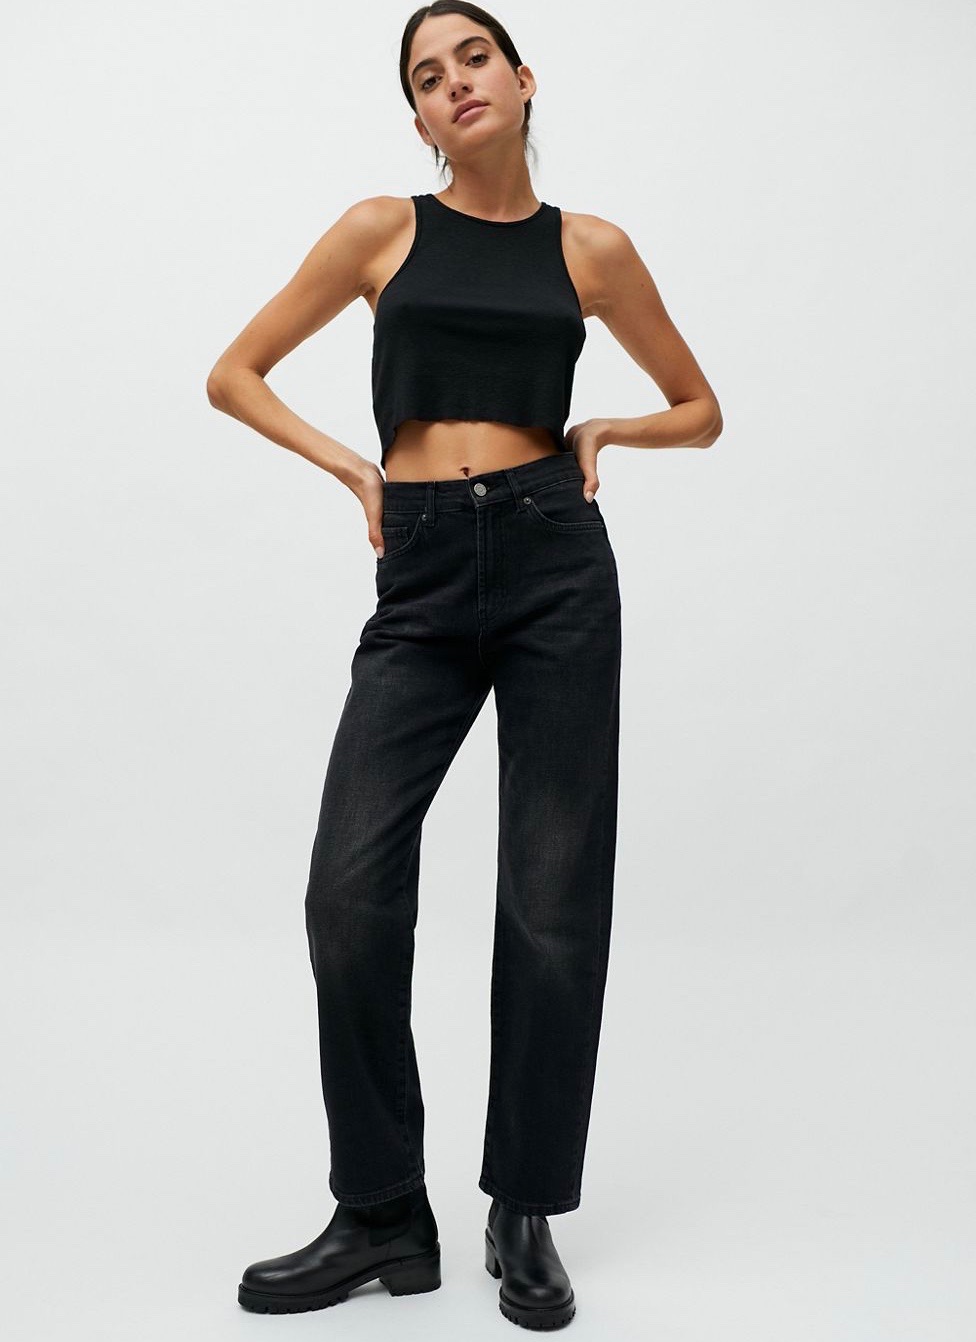 26 Best Black Jeans to Wear This Fall and Winter - theFashionSpot